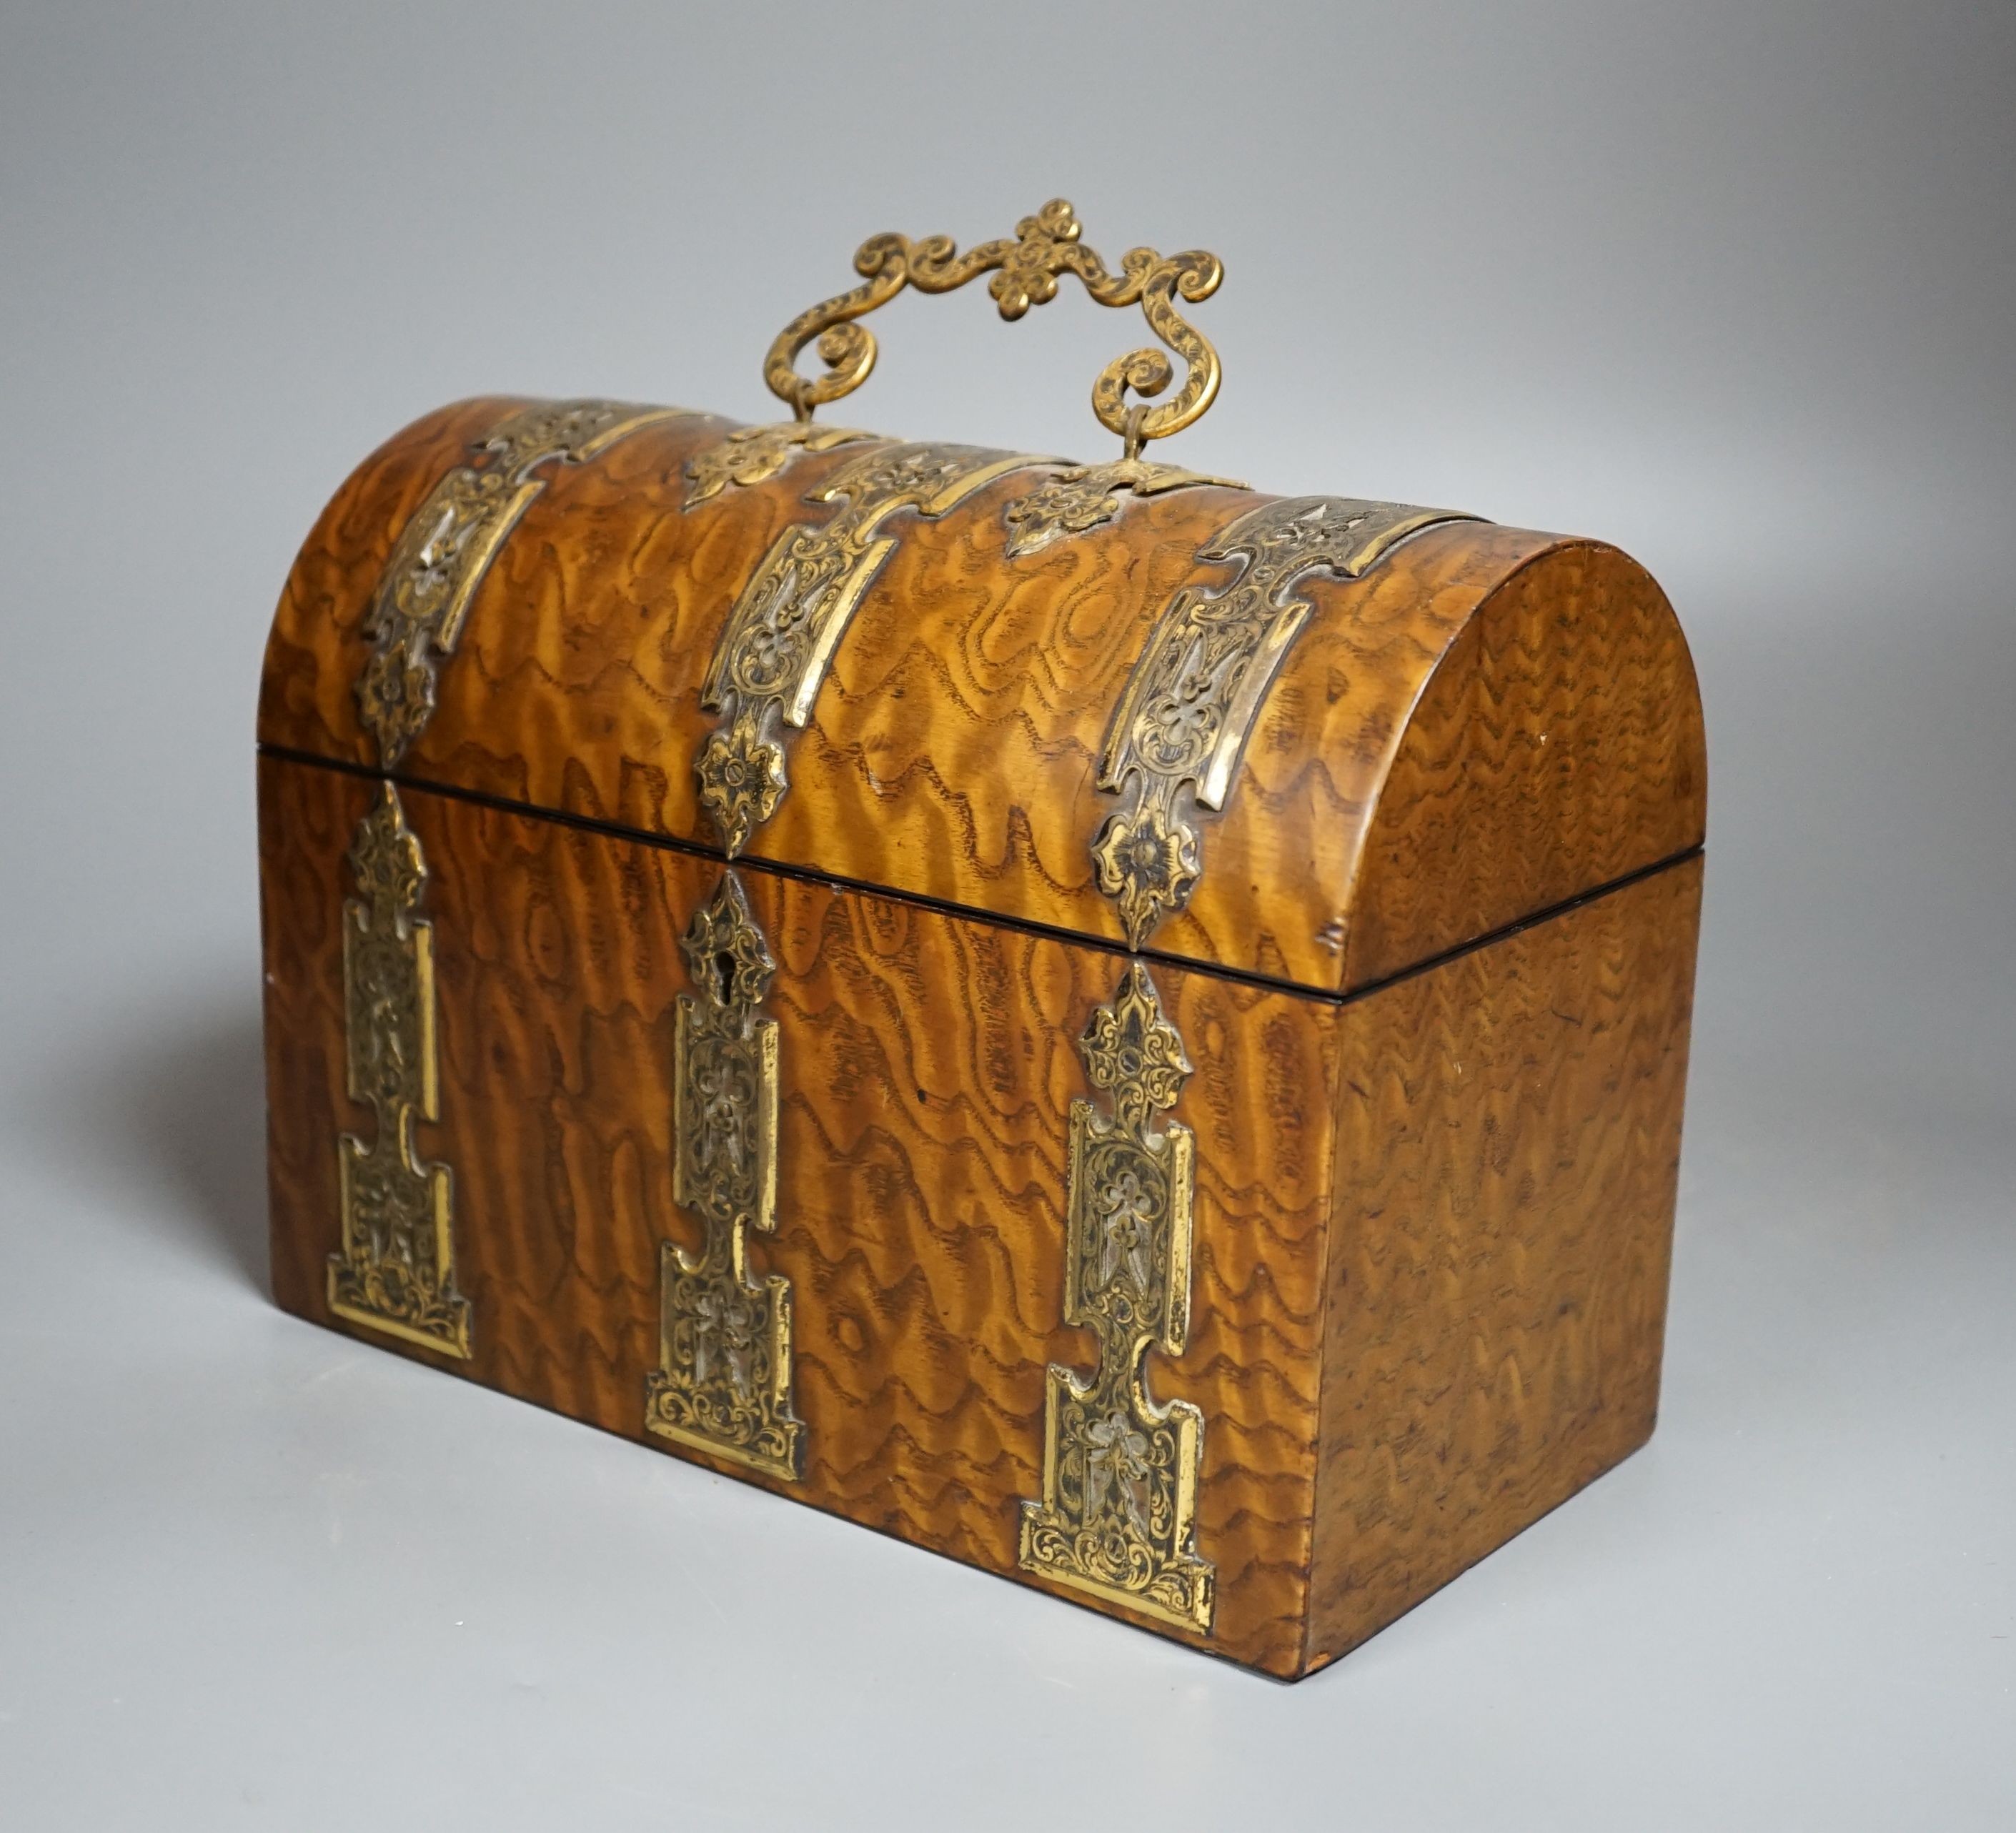 A Victorian Hungarian ash stationery box by Mechi, 114 Regent Street London, domed top with decorative gilt mounts fitted interior with 